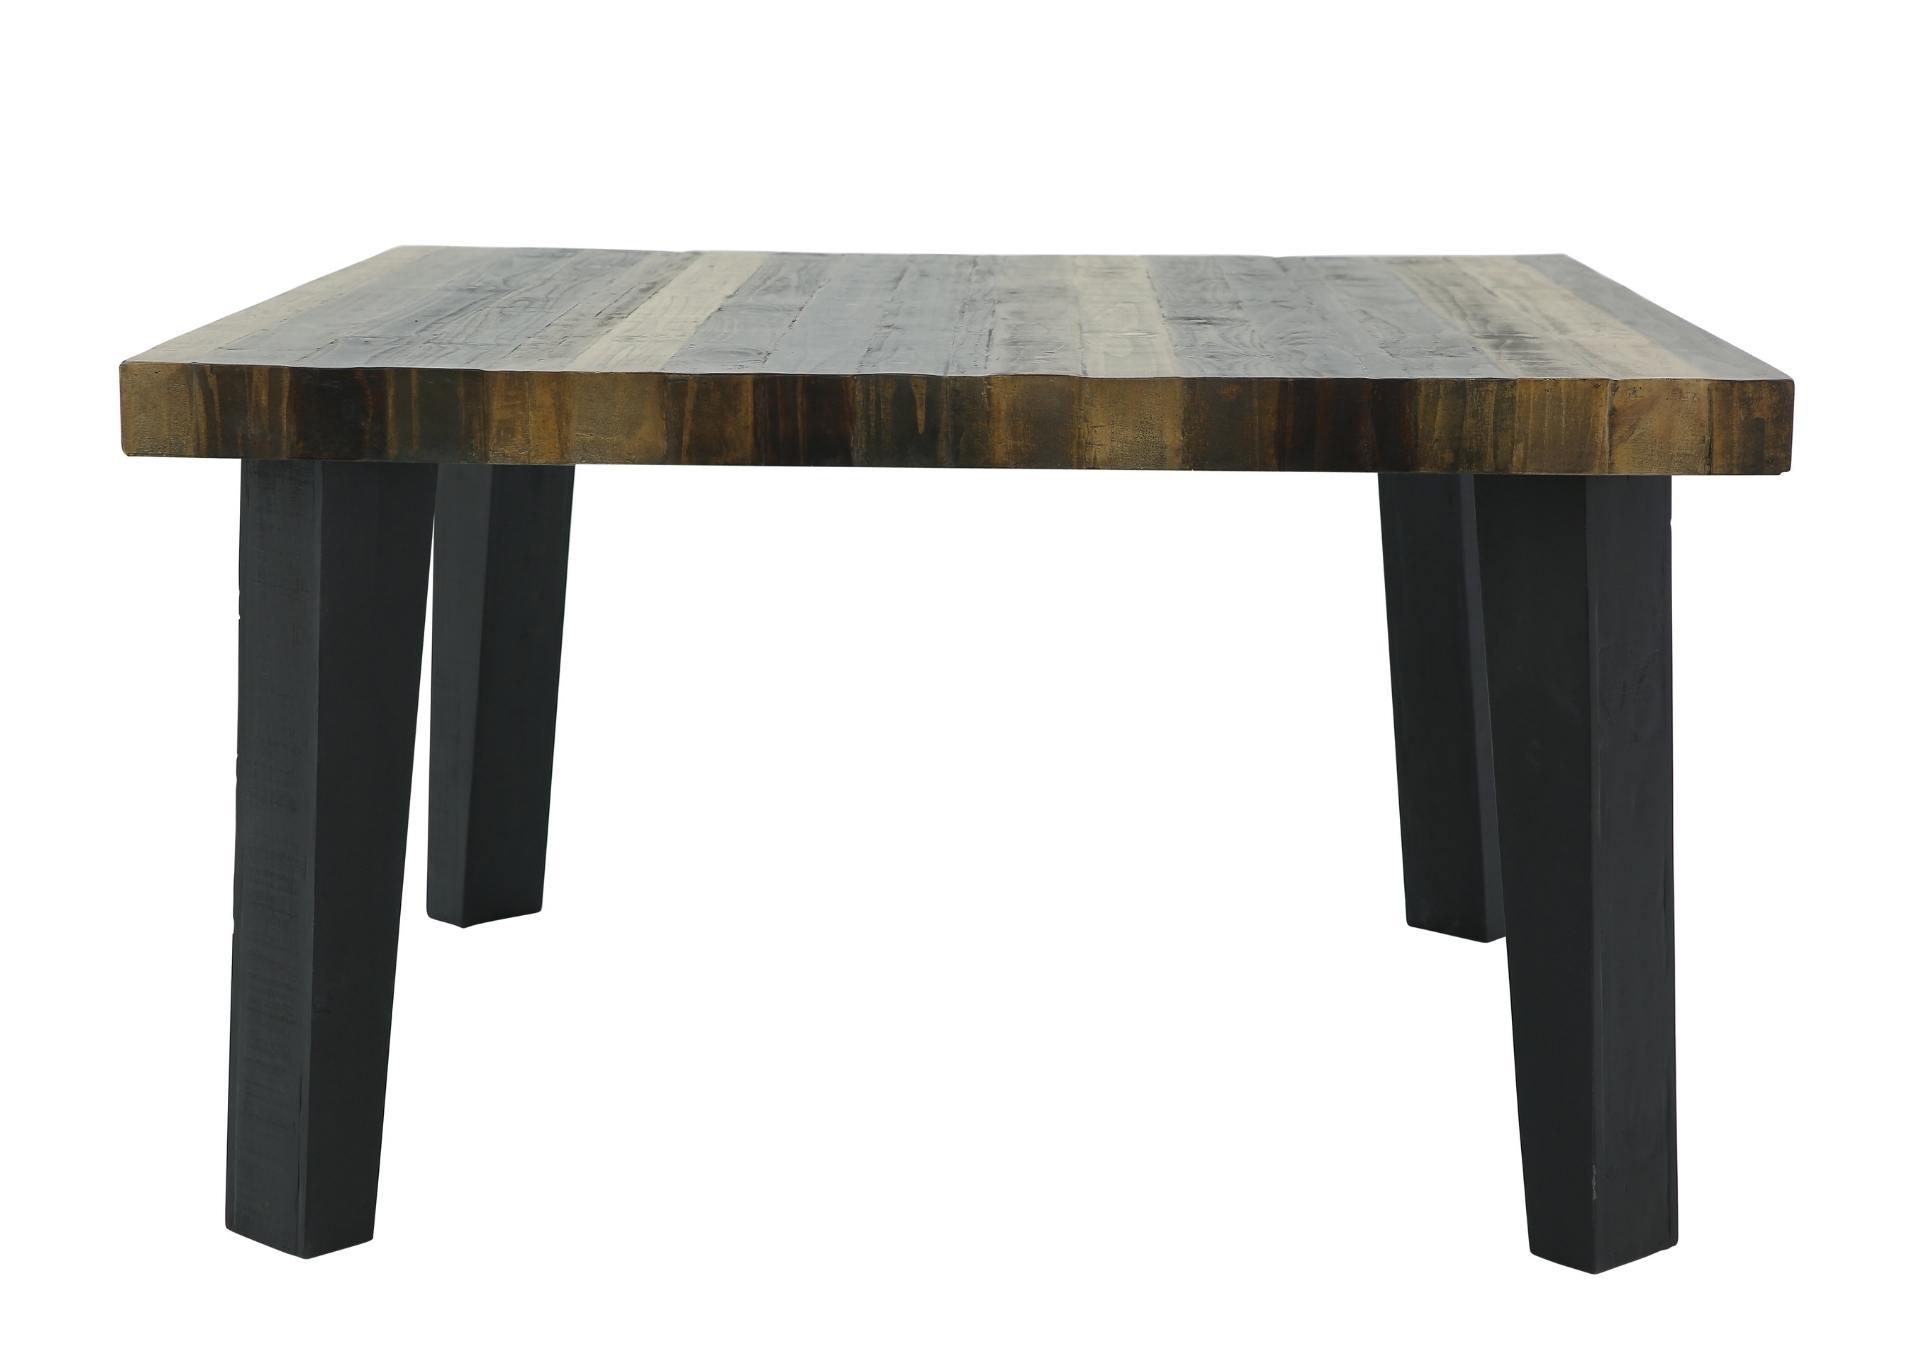 VICTORIA COUNTER HEIGHT DINING TABLE